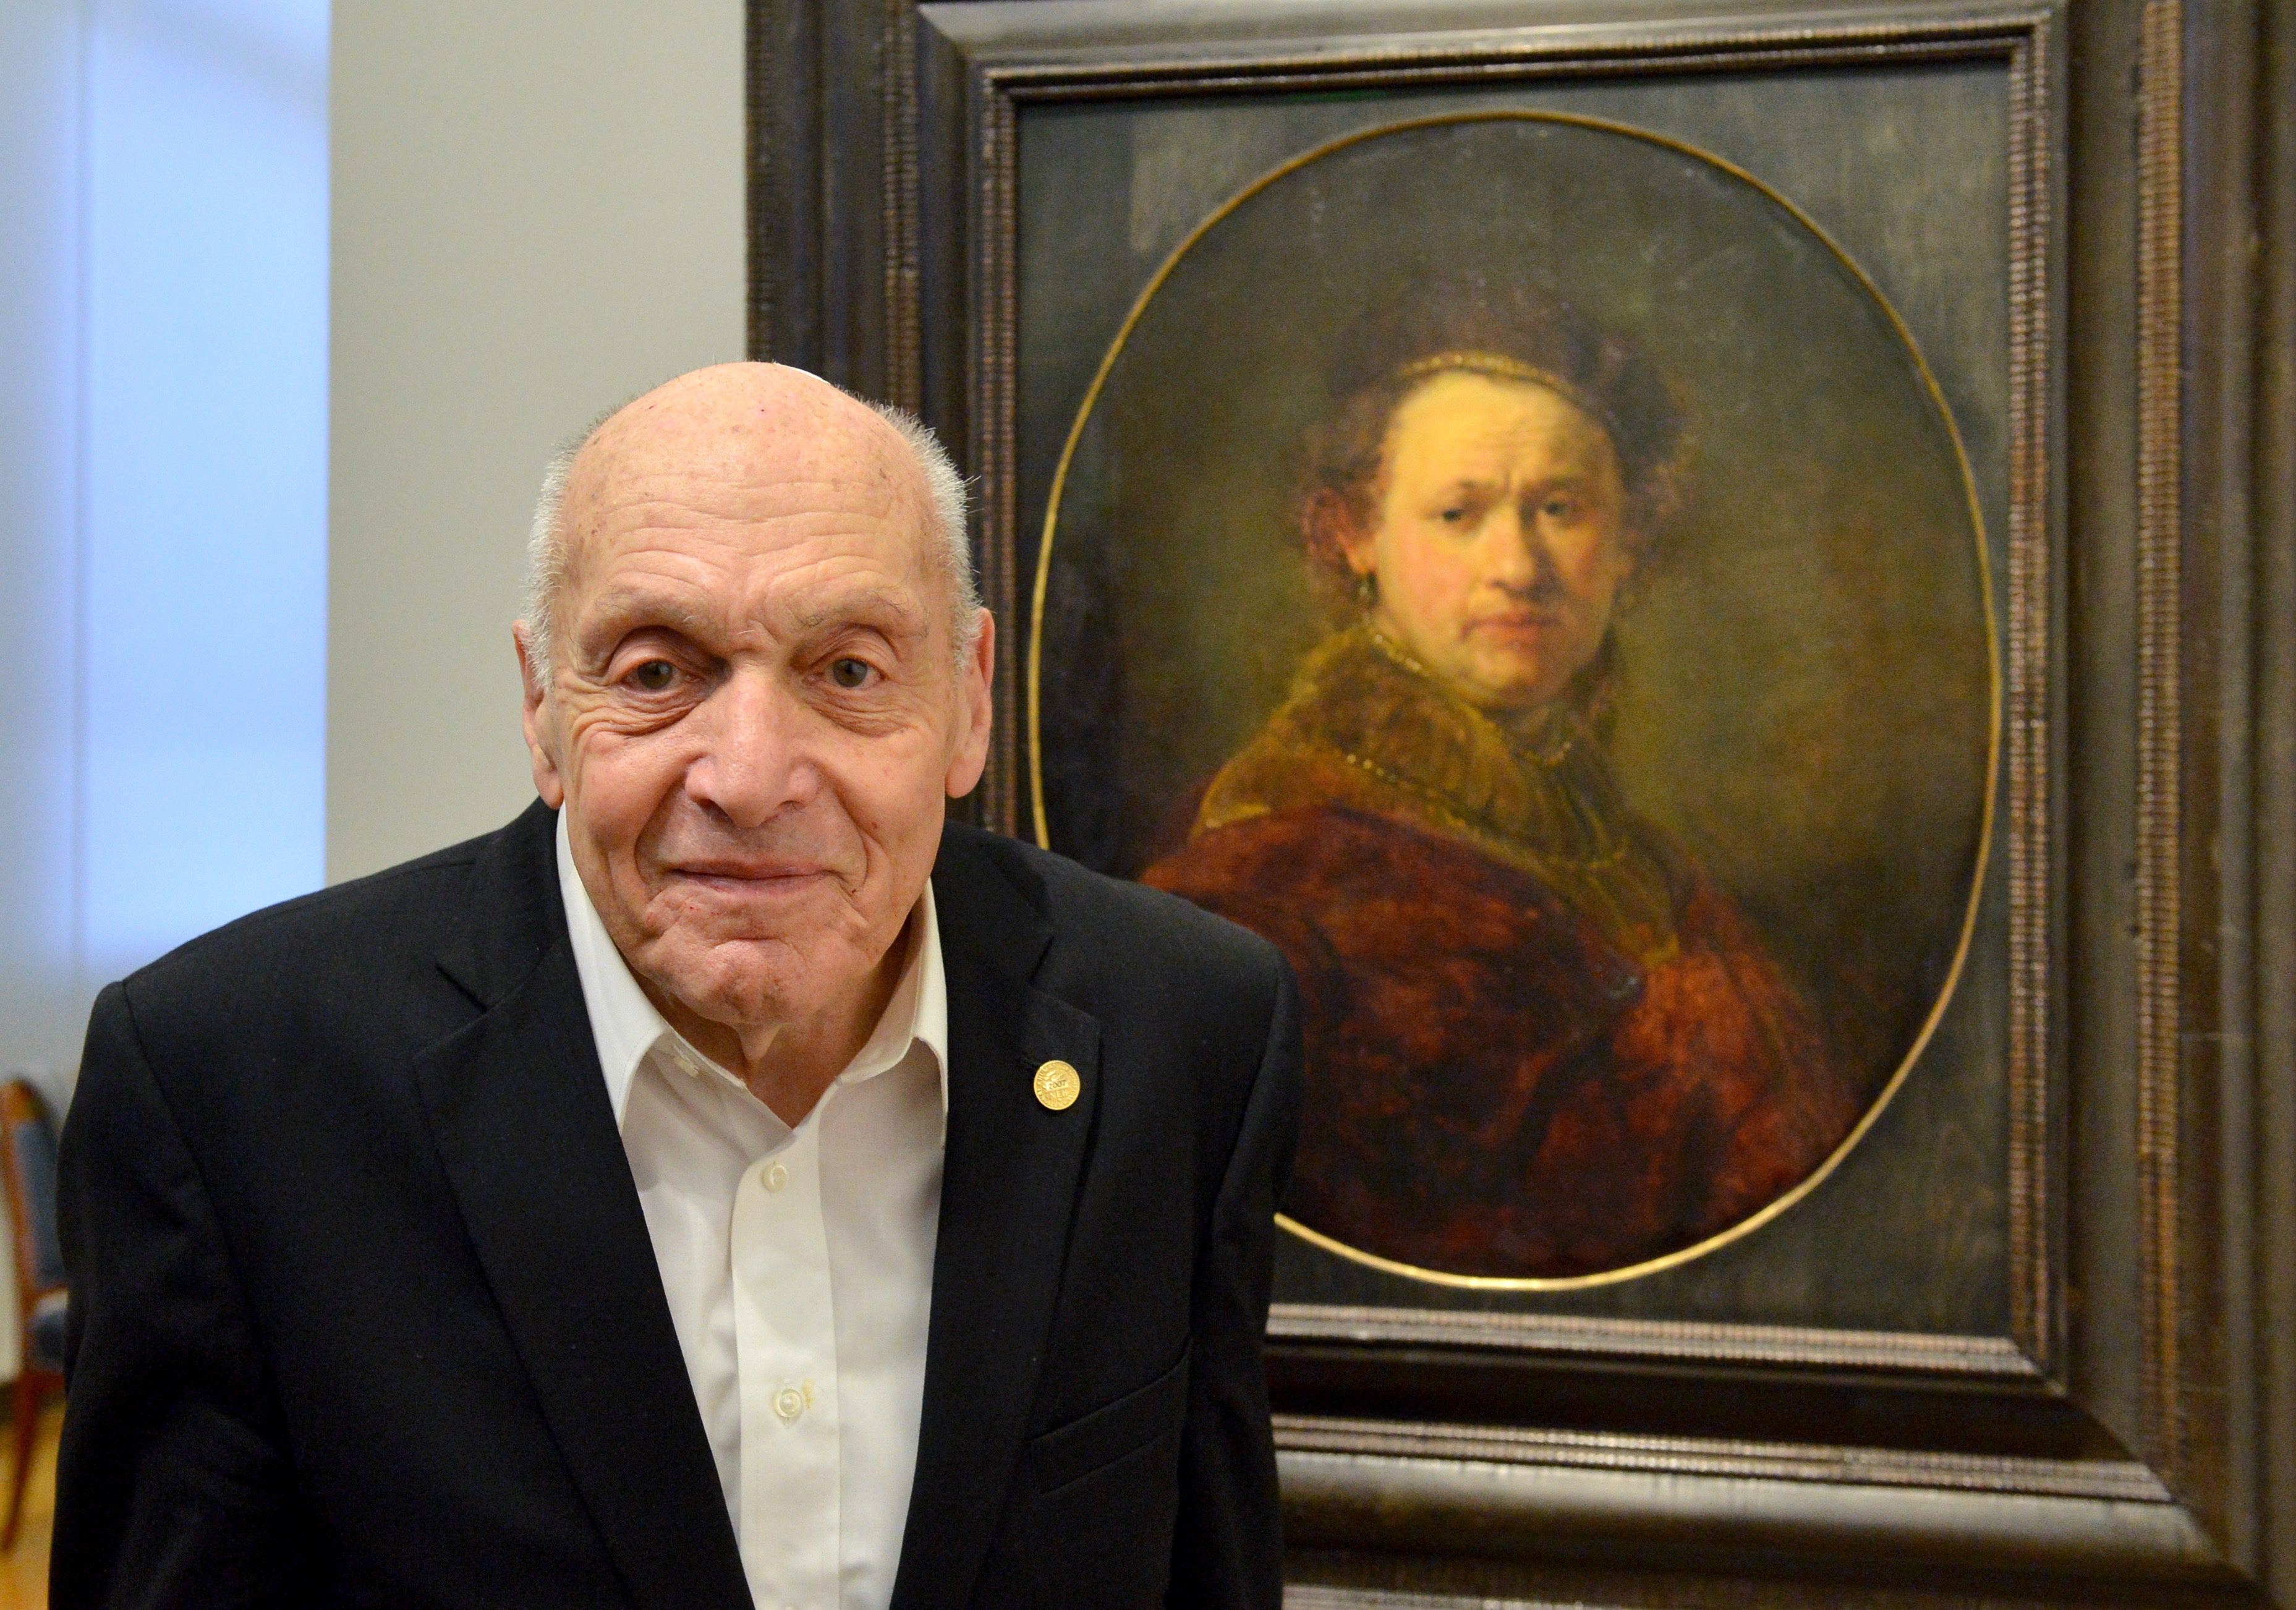 German born Harry Ettlinger, a Jewish member of the Monuments Men, stands in front of a Rembrandt painting at the art museum Kunsthalle in Karlsruhe, southern Germany in 2014